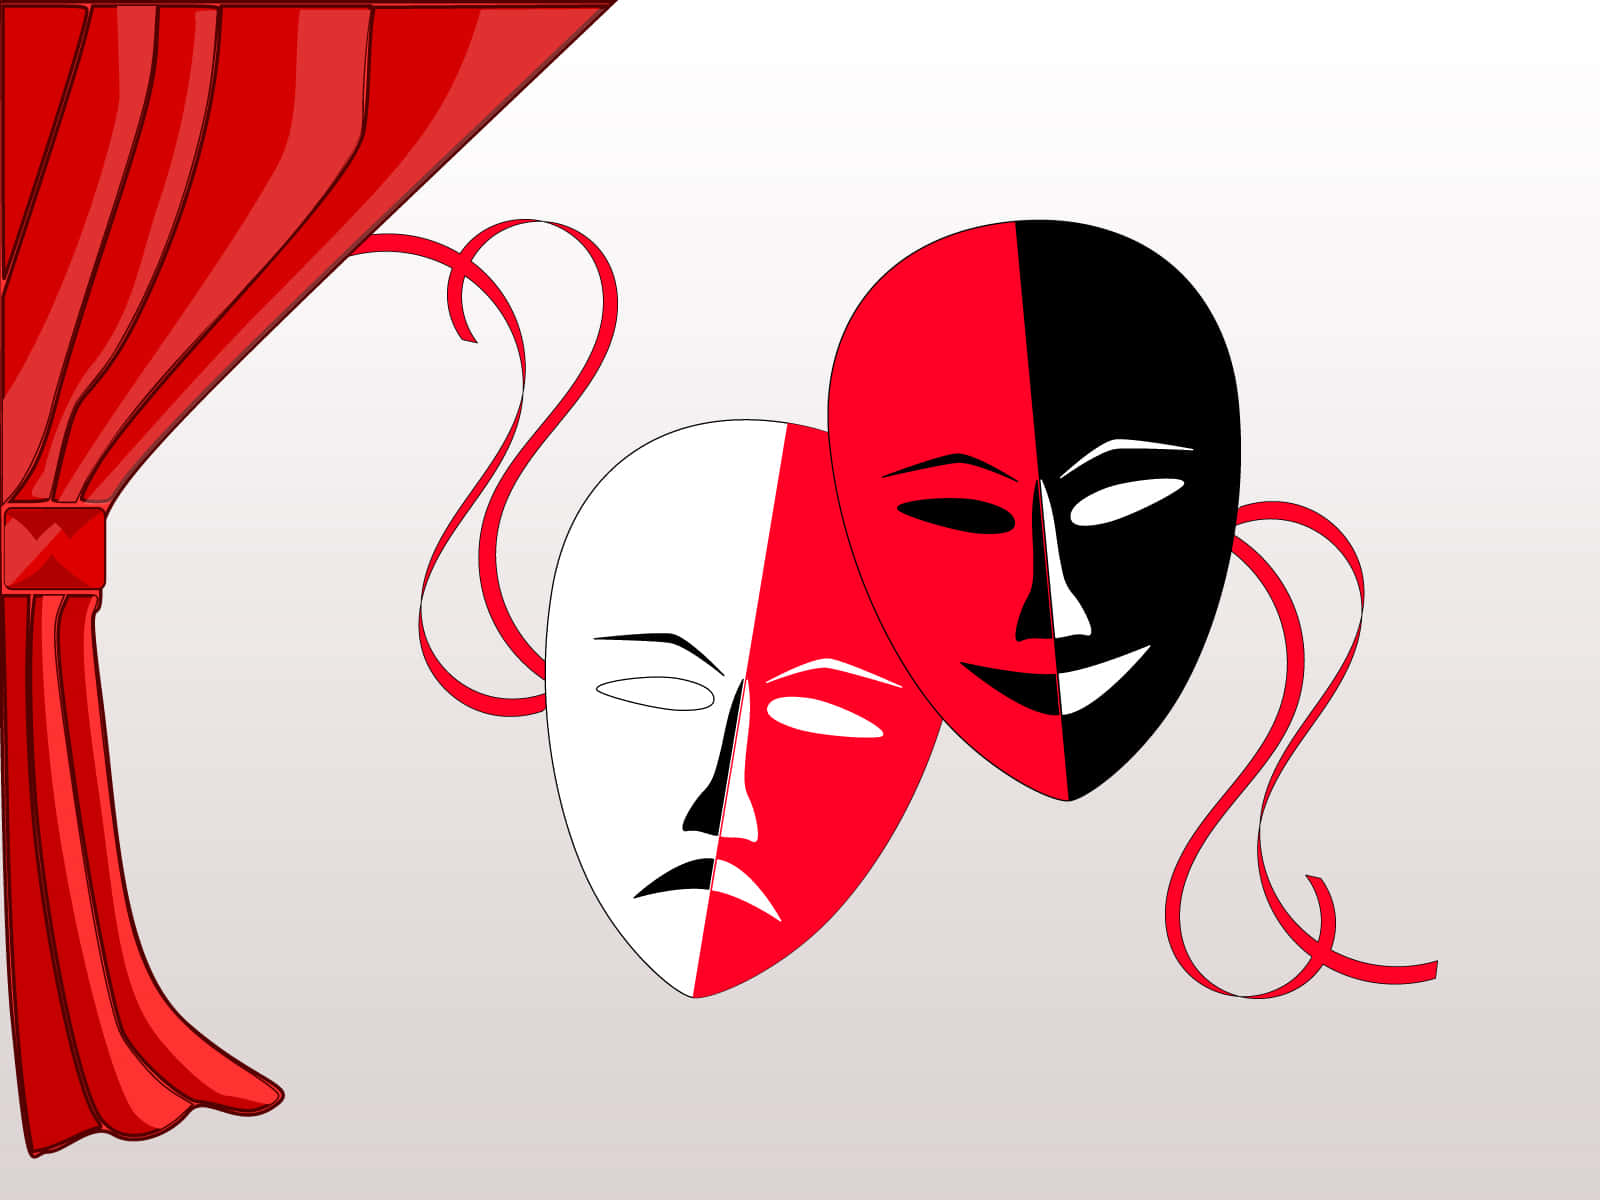 Two Theatre Masks On A Red Curtain